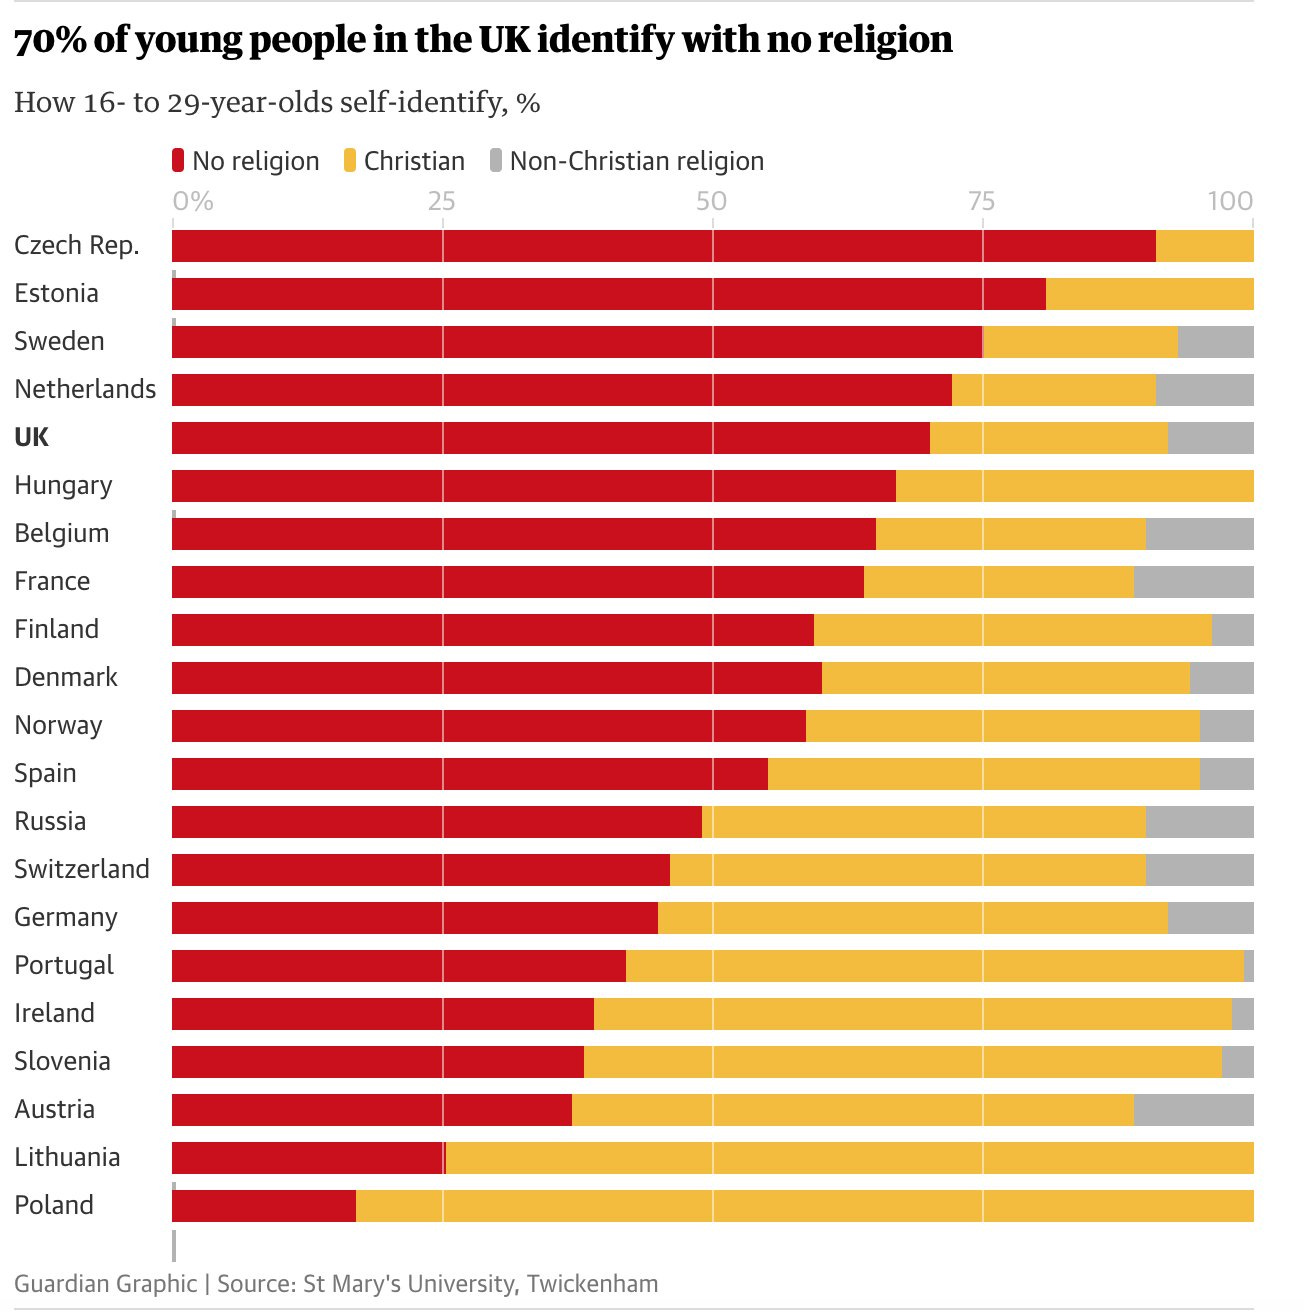 Michael Shermer on X: "New data on the rise of the "Nones" (no religious  affiliation) in Europe. Staggeringly large percentages of European  countries have no religion. https://t.co/MBUjAobyAJ  https://t.co/cddjFtBzHd" / X